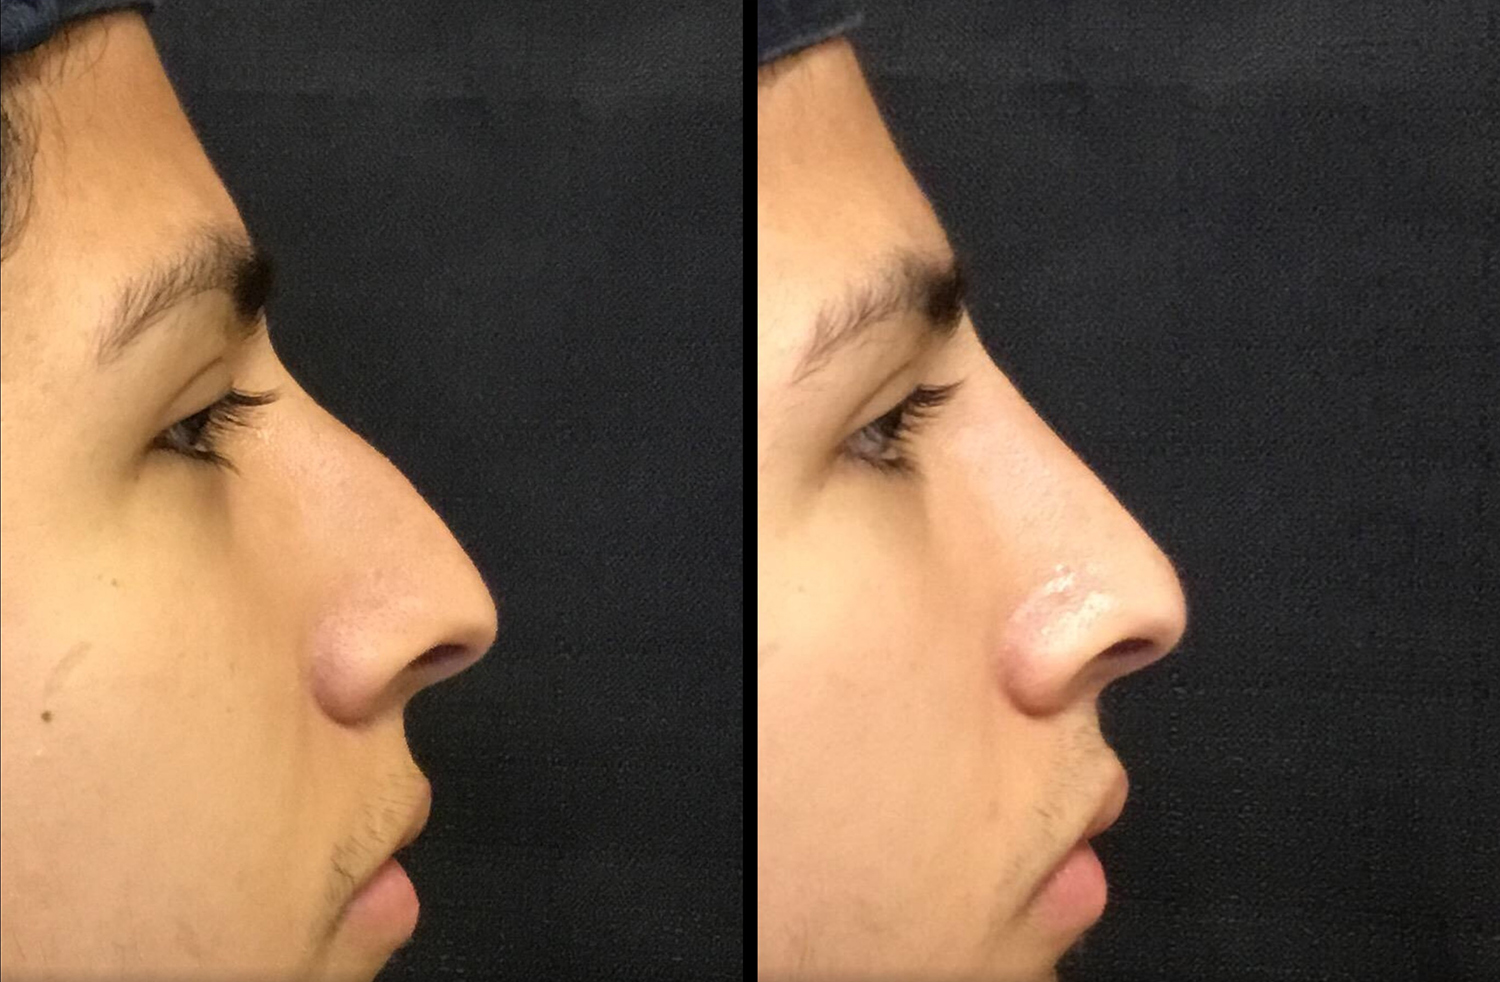 Nasal Contouring (Non-Surgical Rhinoplasty) Before and After Photo by Dr. Hernandez in San Antonio Texas